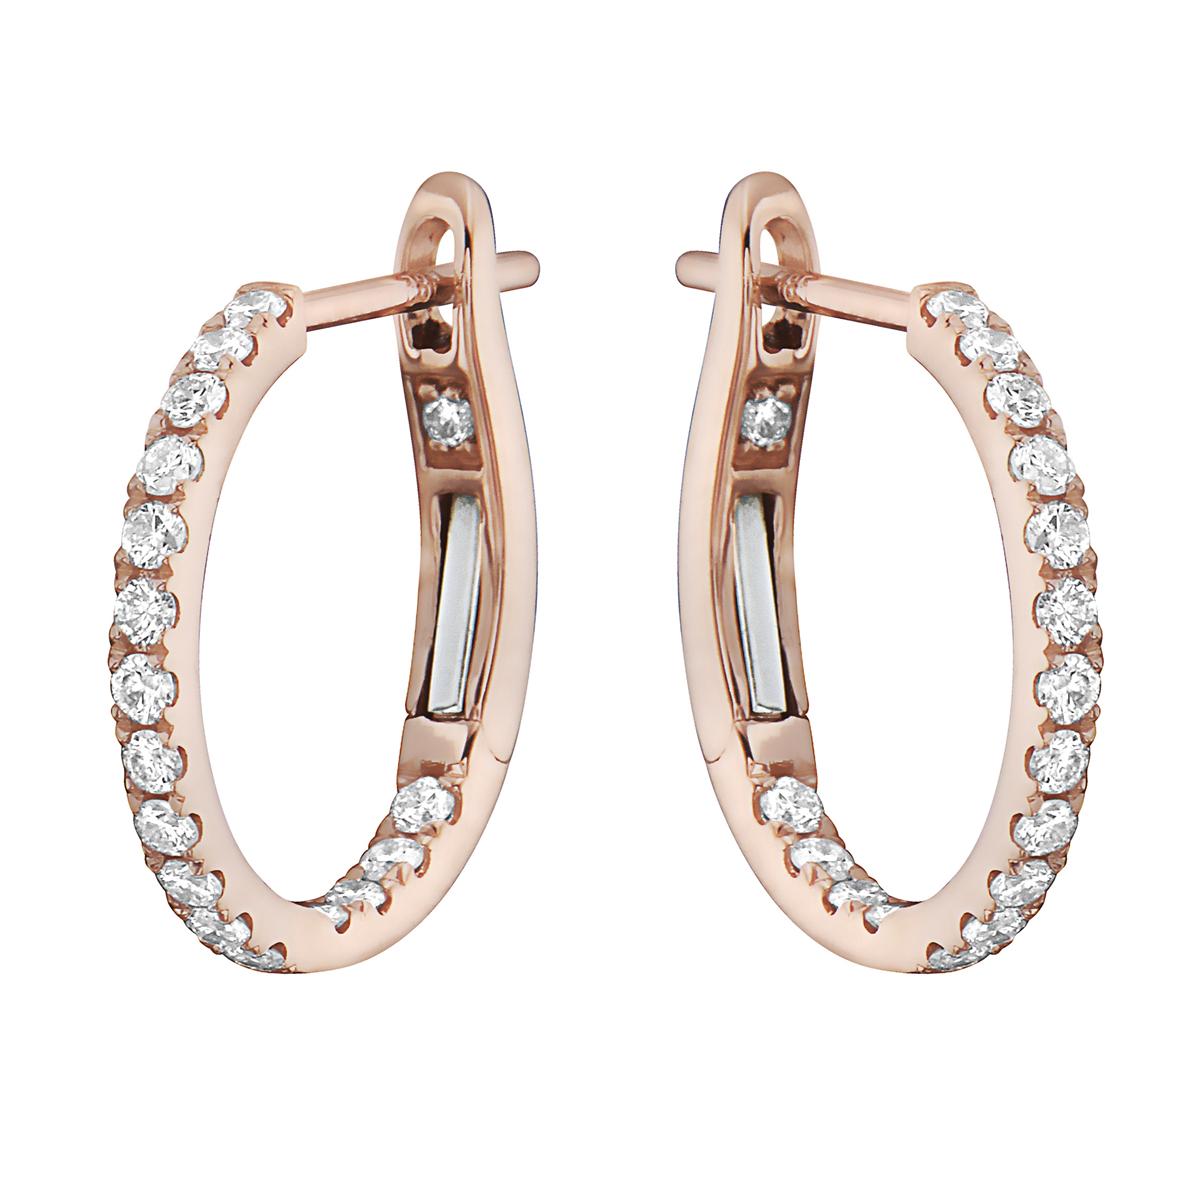 With these exquisite diamond earrings, style and glamour are in the spotlight. These rose gold hoop earrings are set in 14-karat gold and made from 2.1 grams of gold. The color of the diamonds is GH. The clarity is SI1. This piece is made out of 34